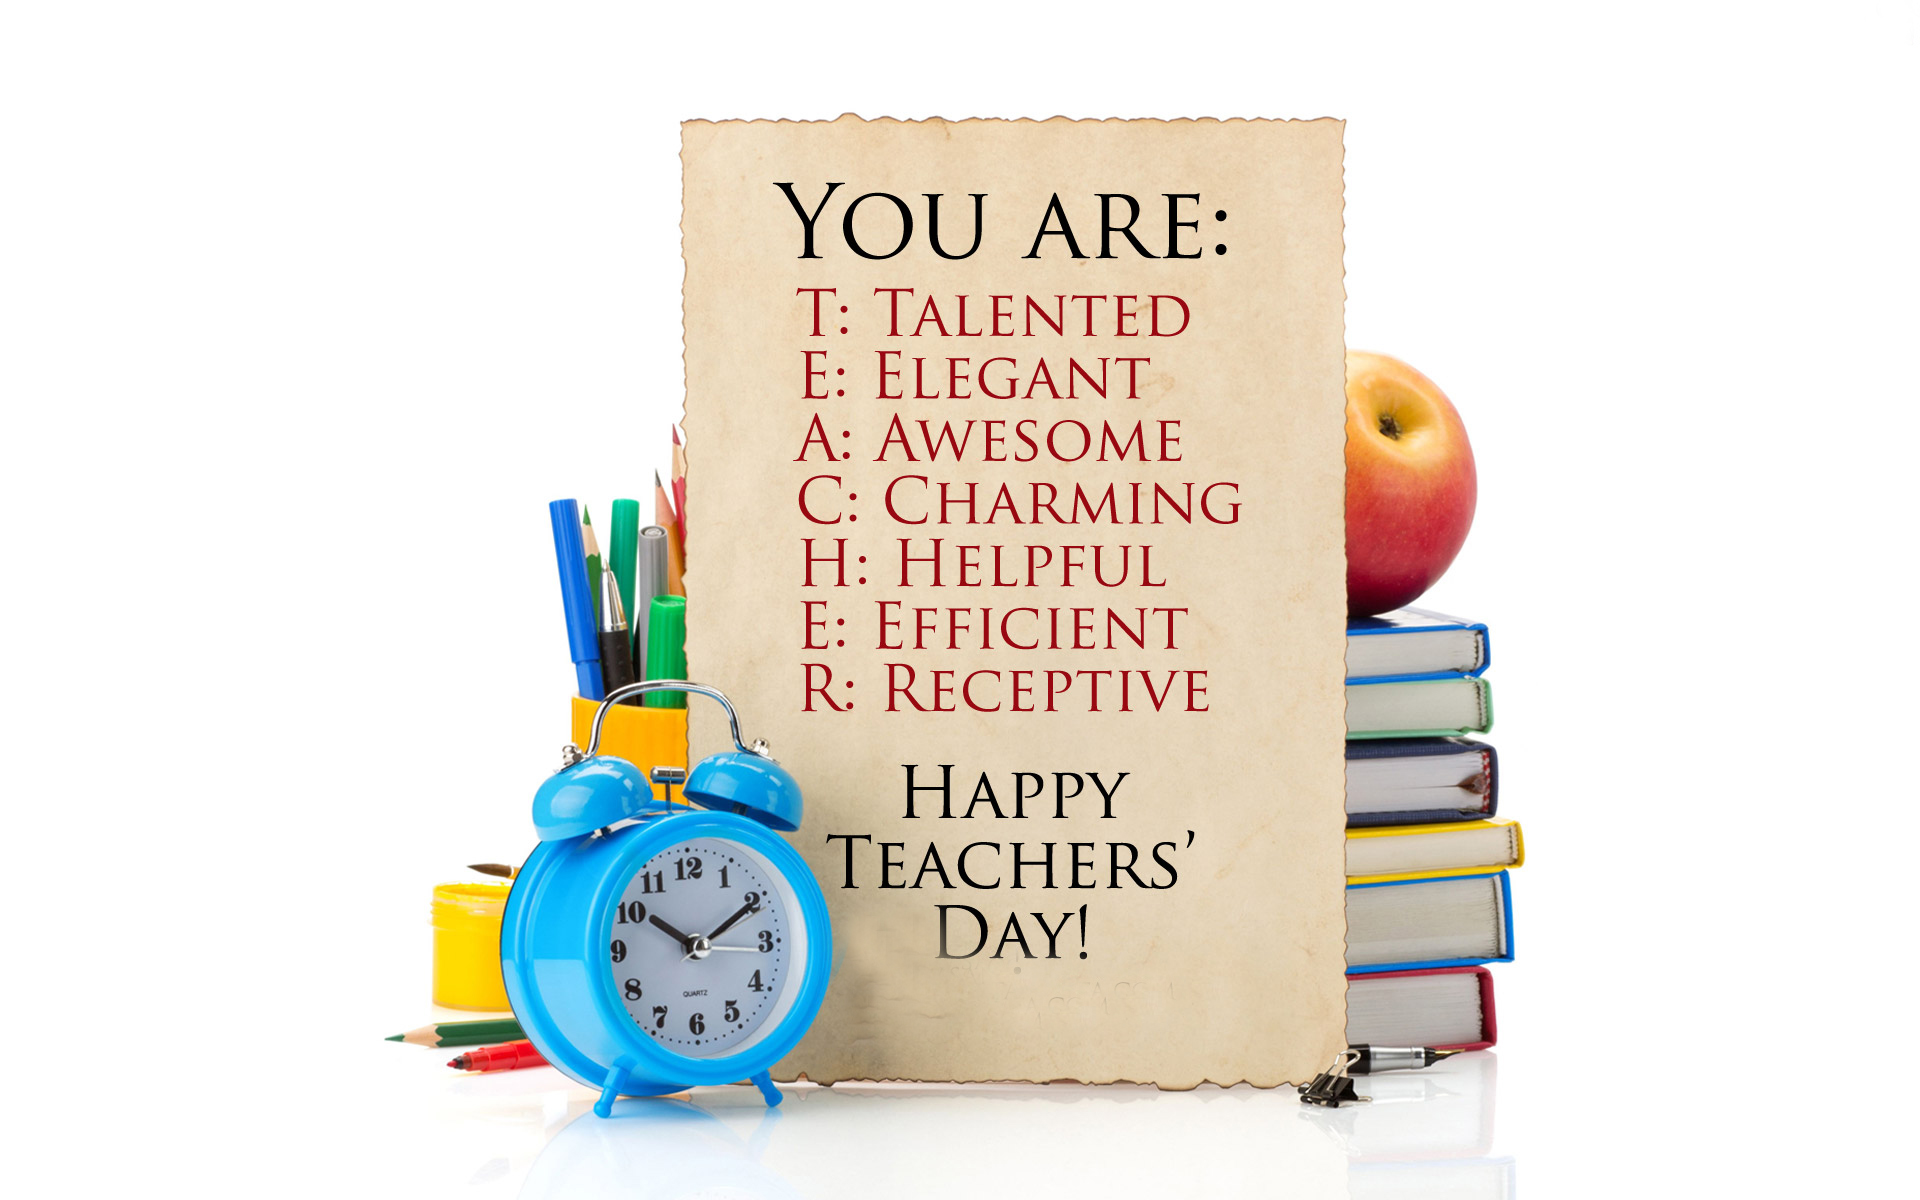 Happy Teachers Day Wishes, SMS, Quotes, Images, Pics to send to Teachers